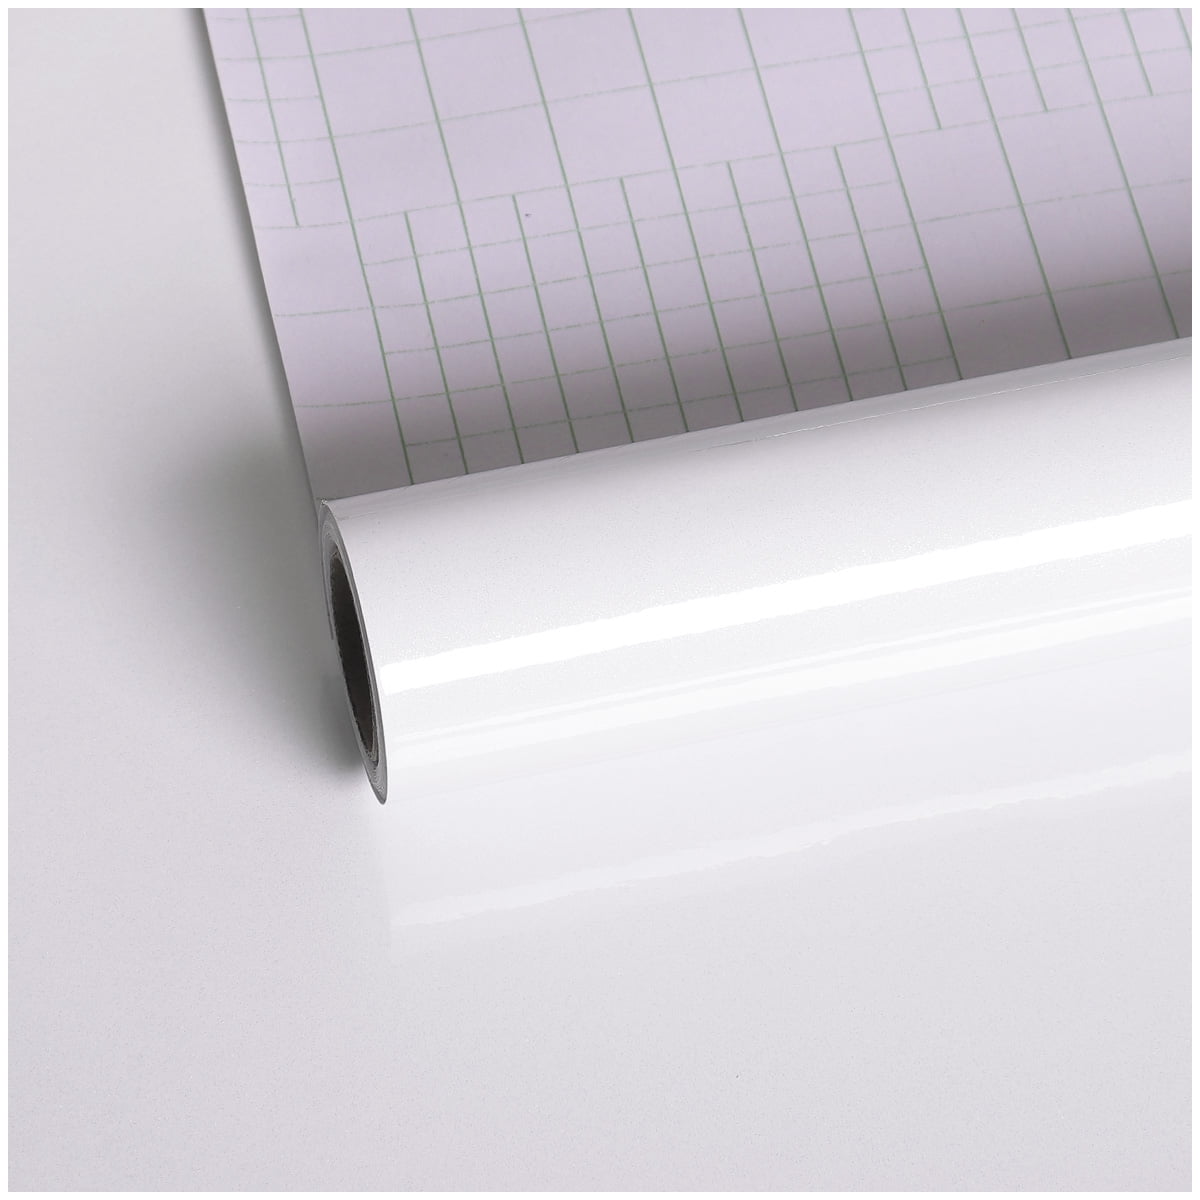 Clear Contact Paper, Plastic Wall Protector Sheet, Clear Contact Paper Peel  and Stick, Self Adhesive Removable Desk Cover Protector (Clear 15.7 x 118